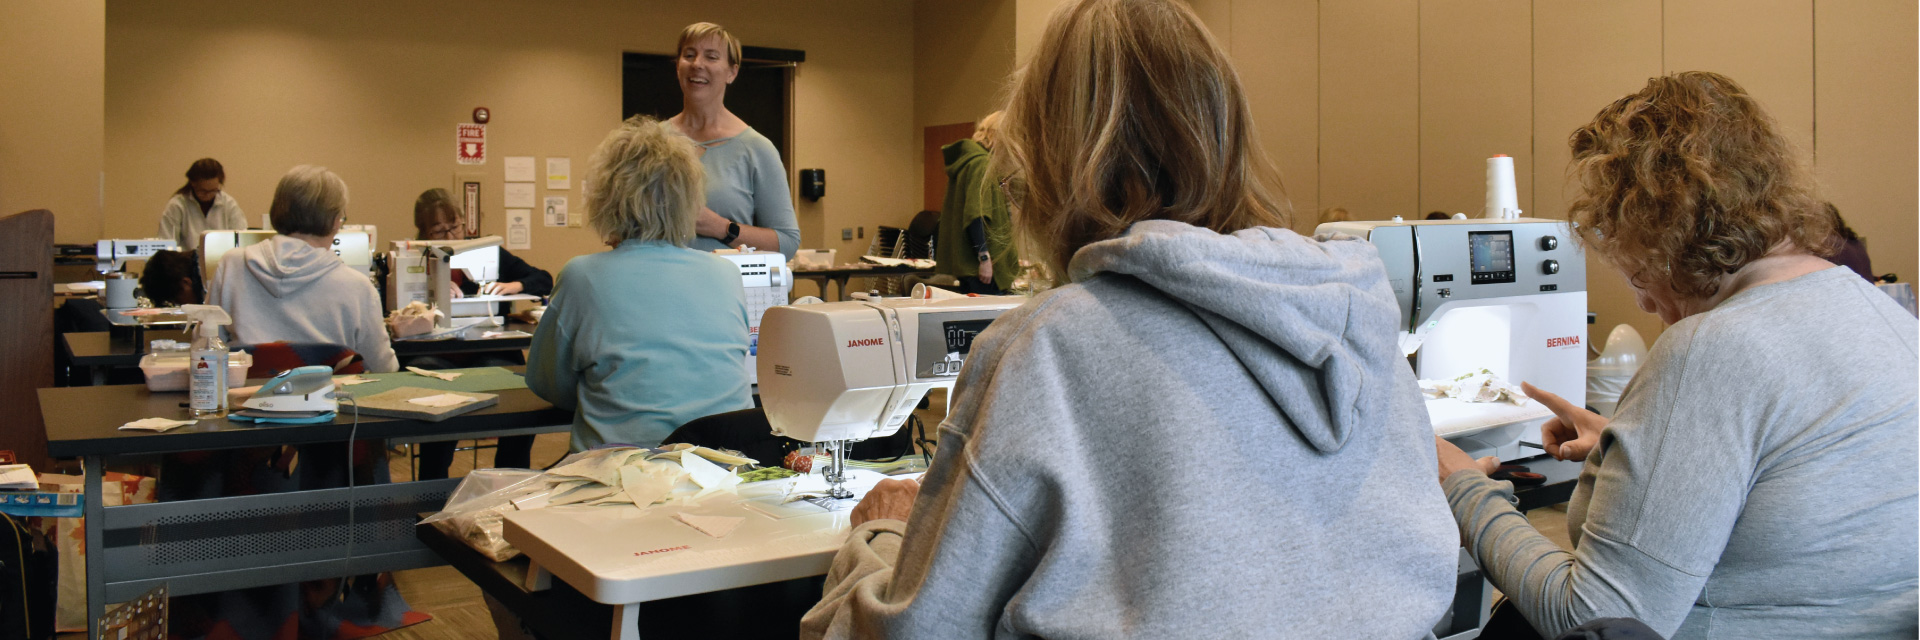 Members Sewing during Quilting Workshop with Chris Schulte